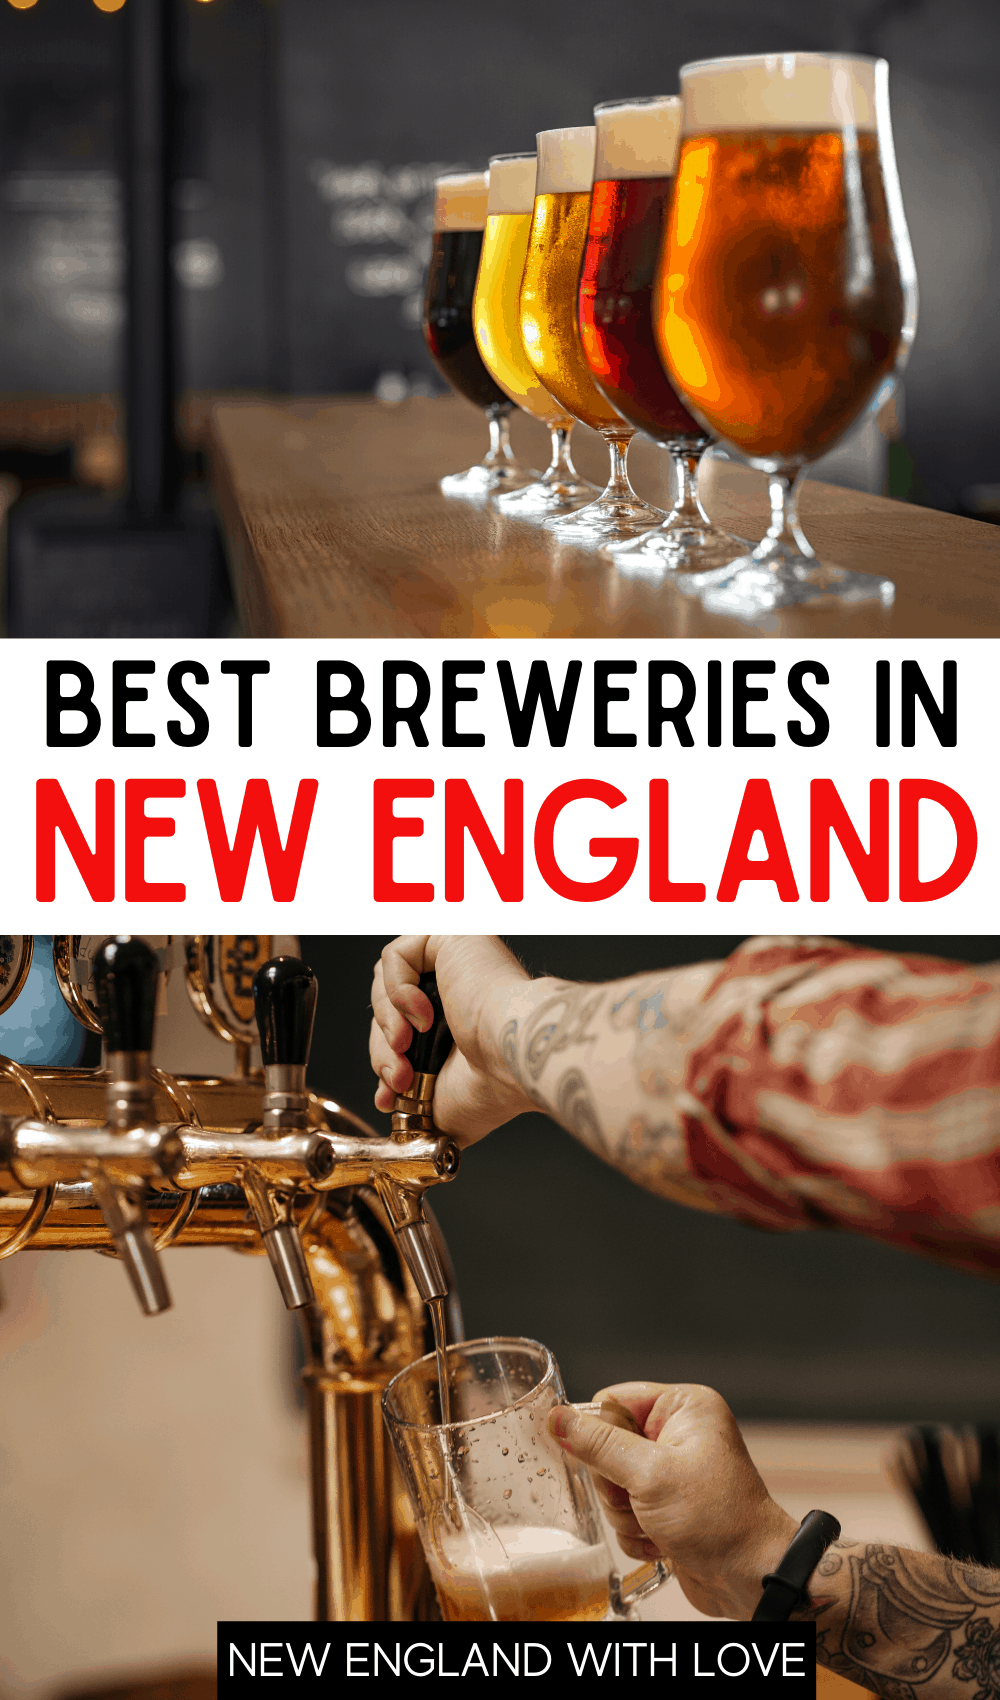 Pinterest graphic reading "BEST BREWERIES IN NEW ENGLAND"